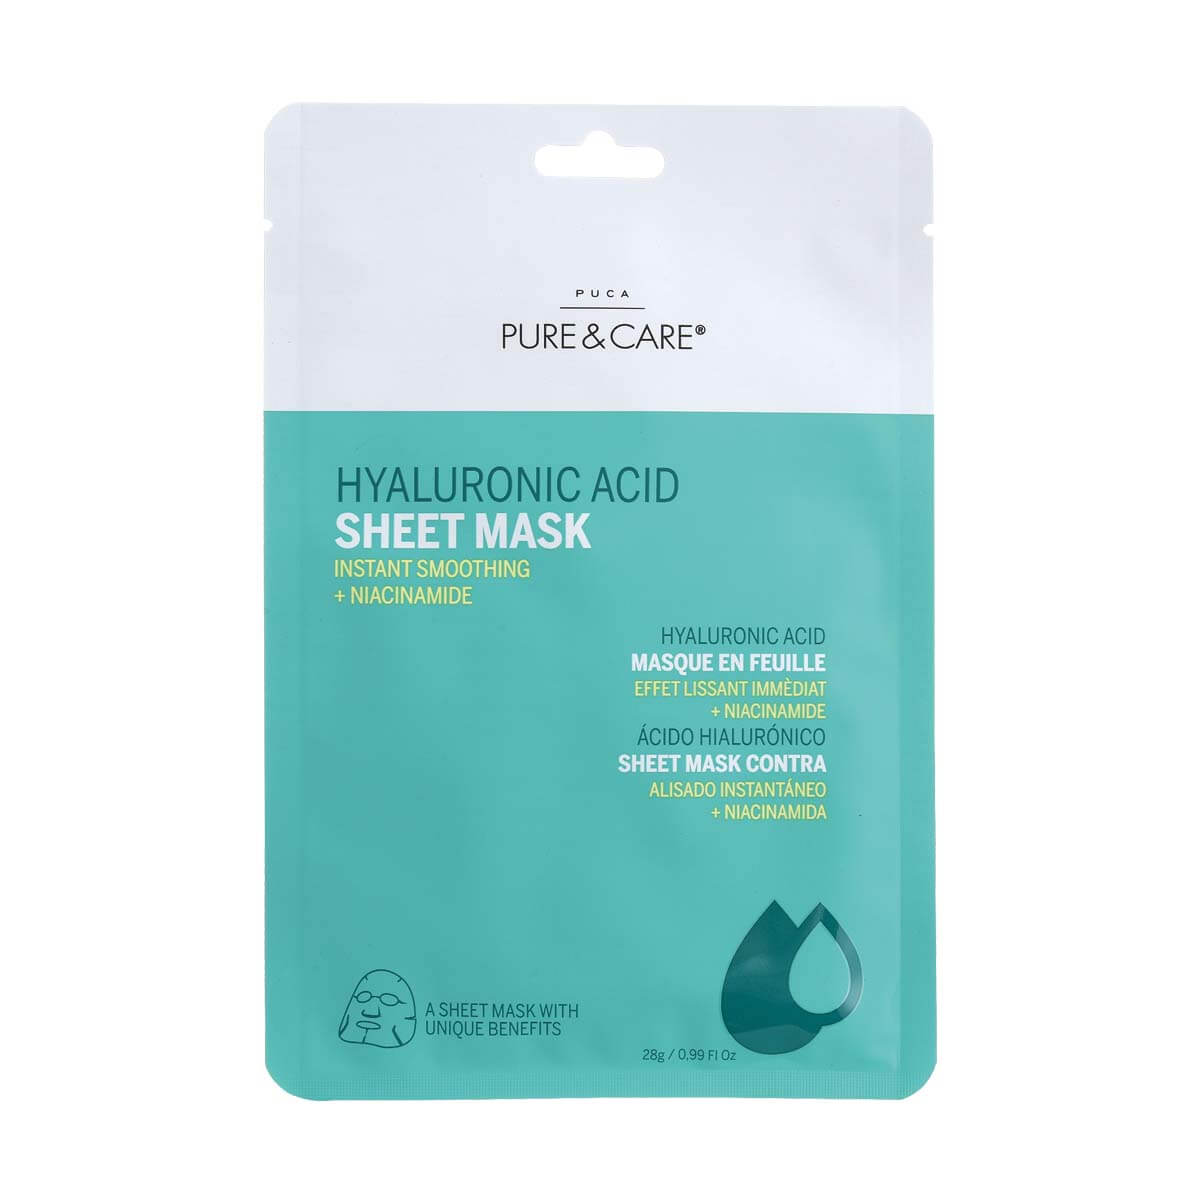 Hyaluronic Acid Sheet Mask | PUCA - PURE & CARE